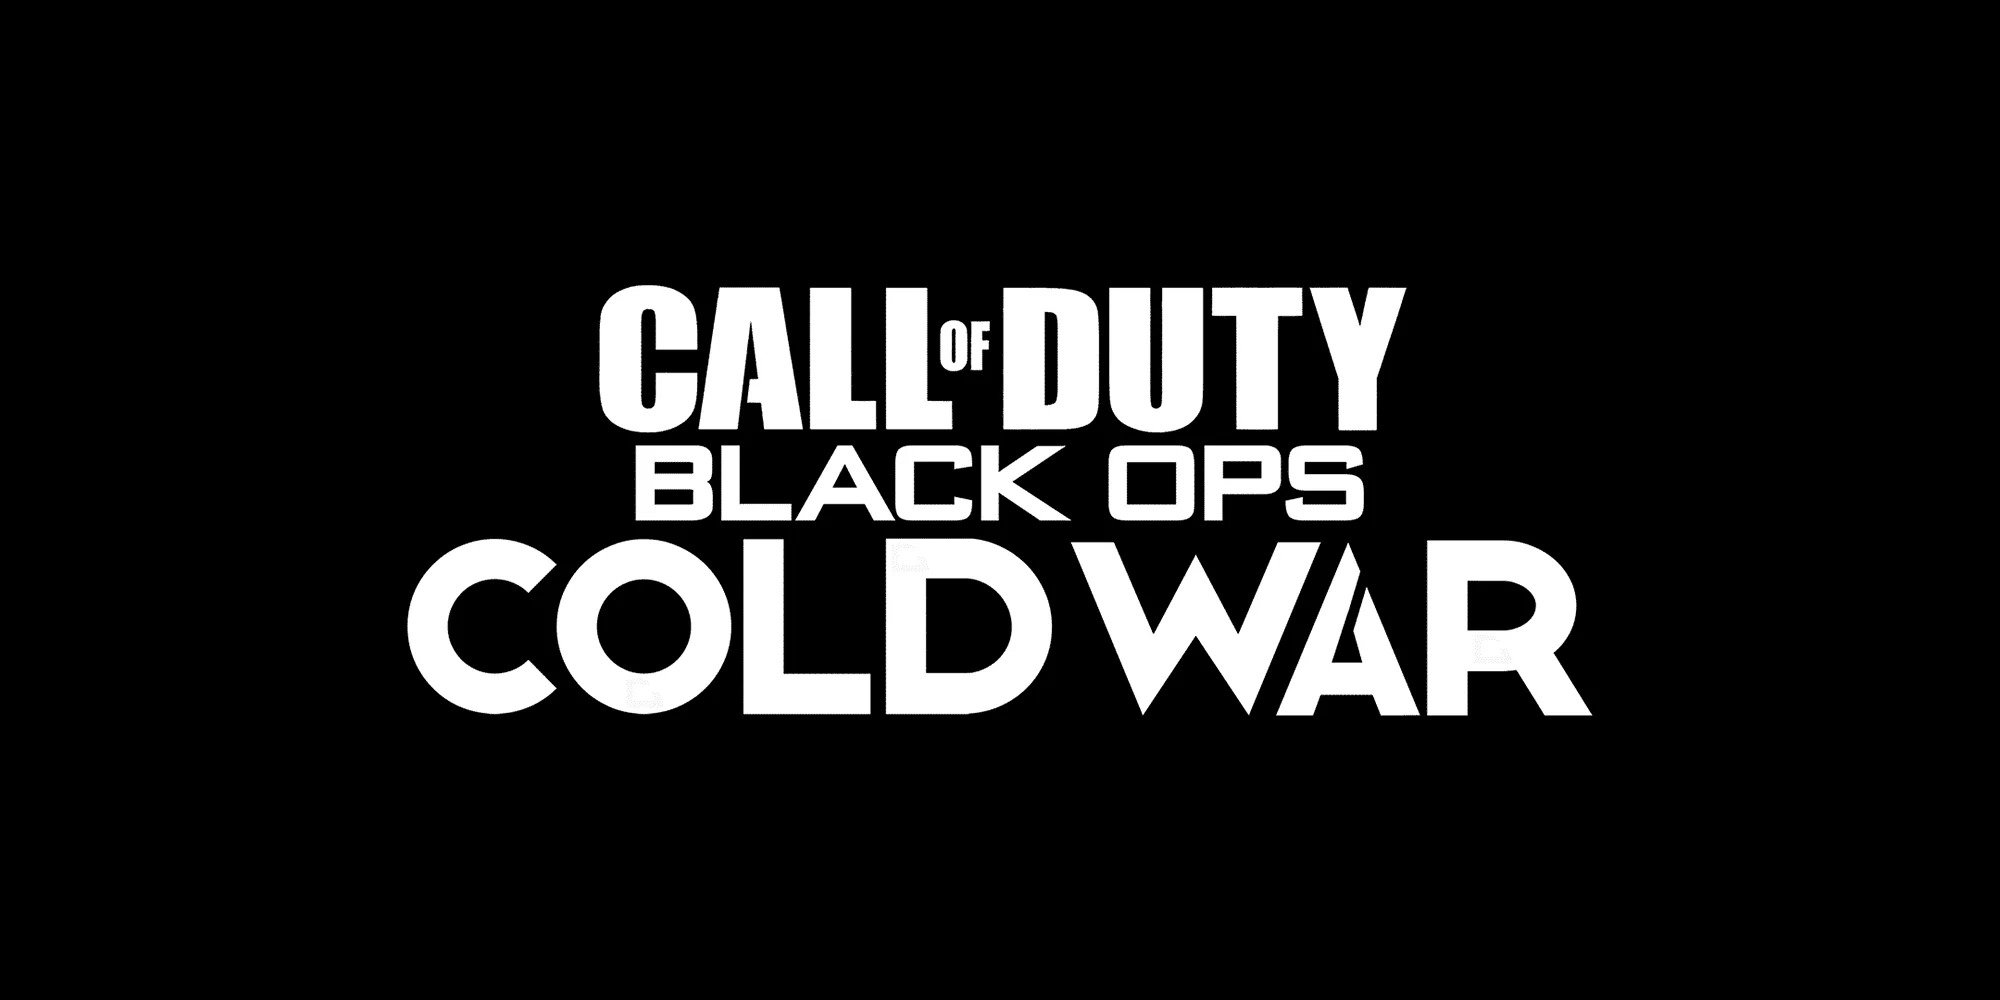 call of duty black ops cold war logo